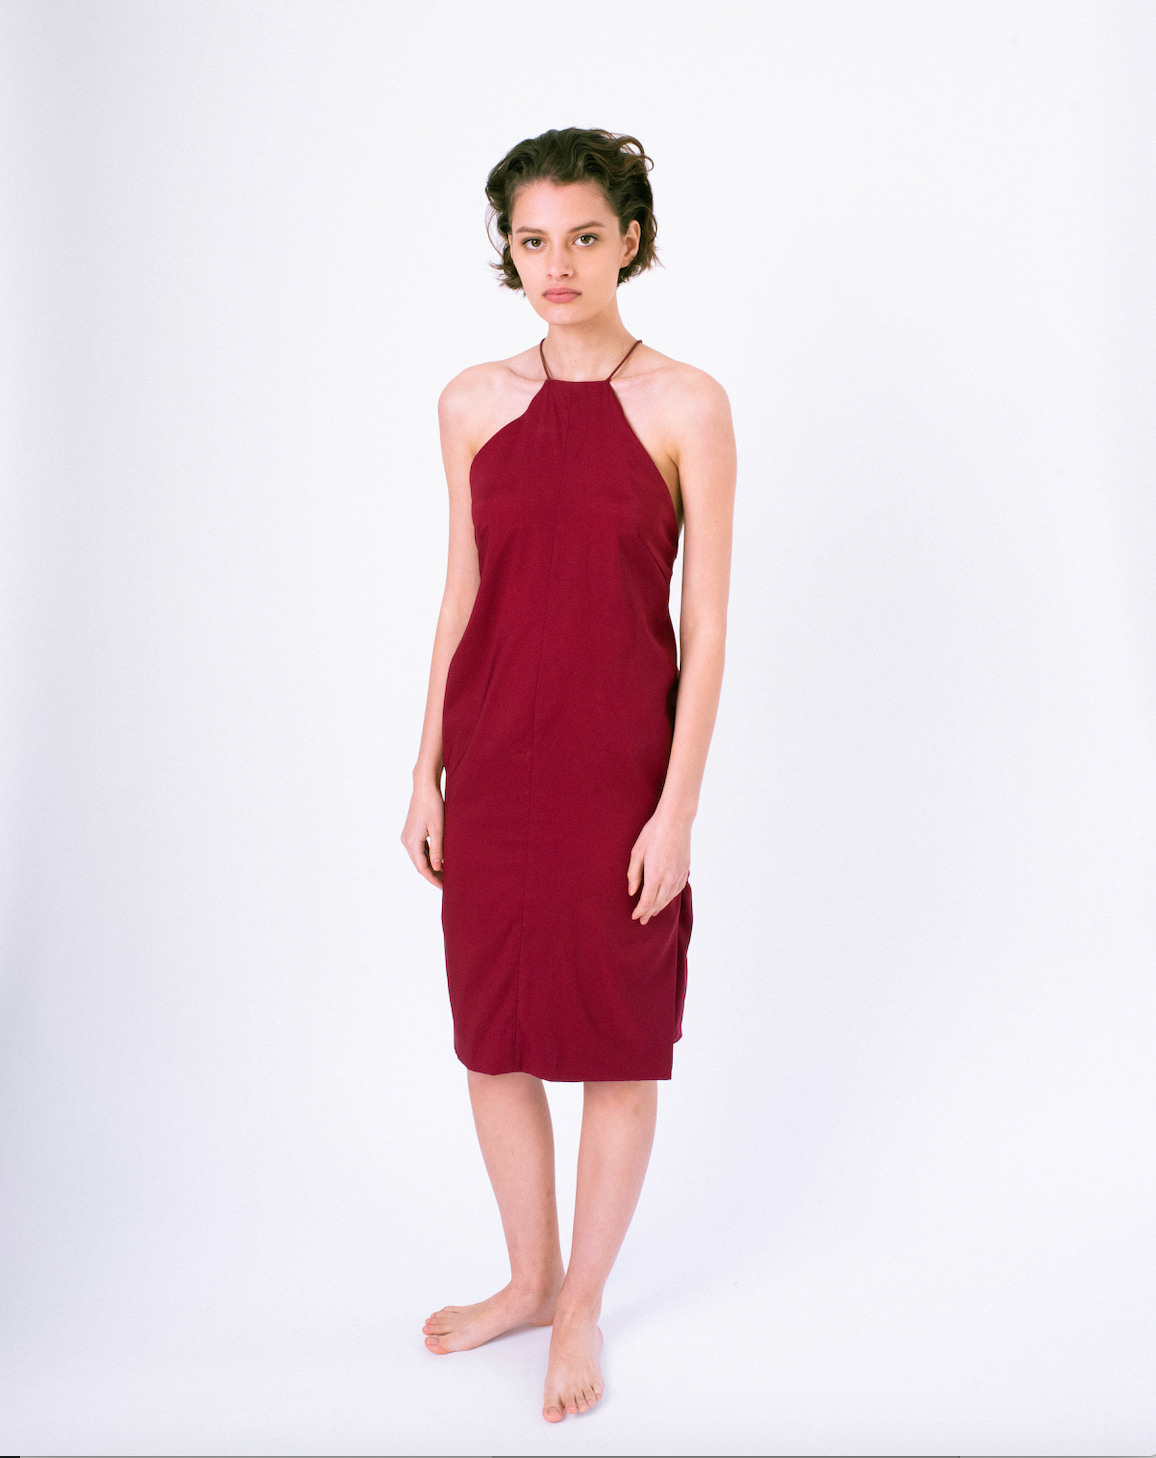 Front of dark red halter dress with open back & crossed straps on woman